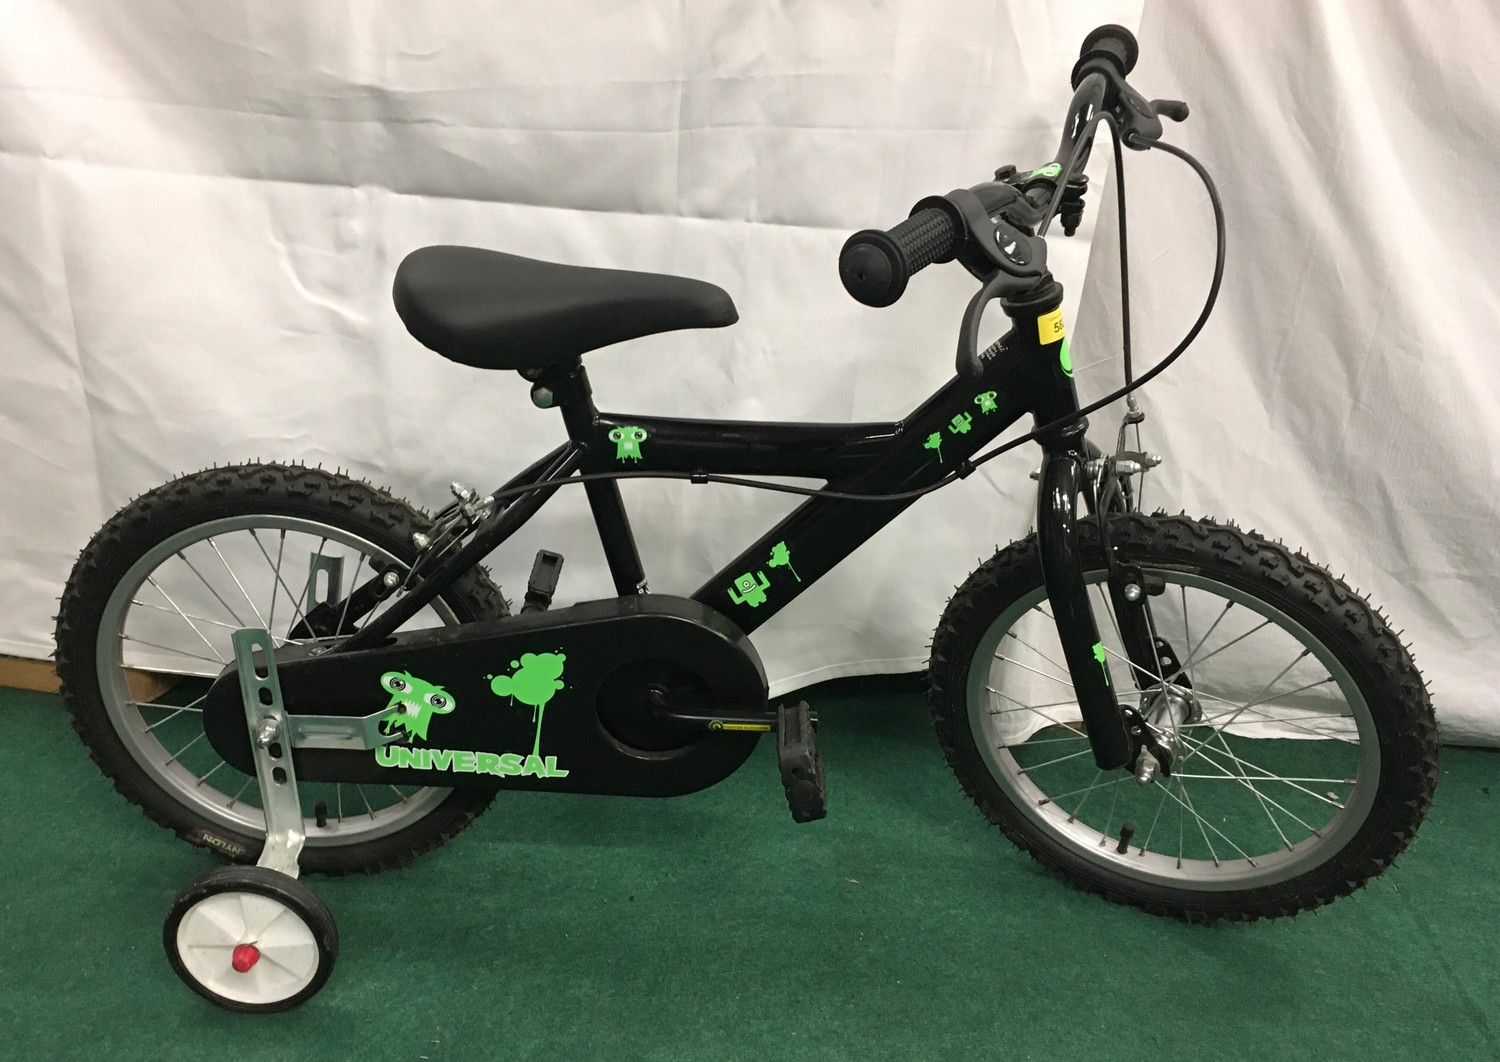 Childs universal black bike with stabilisers (REF 16).